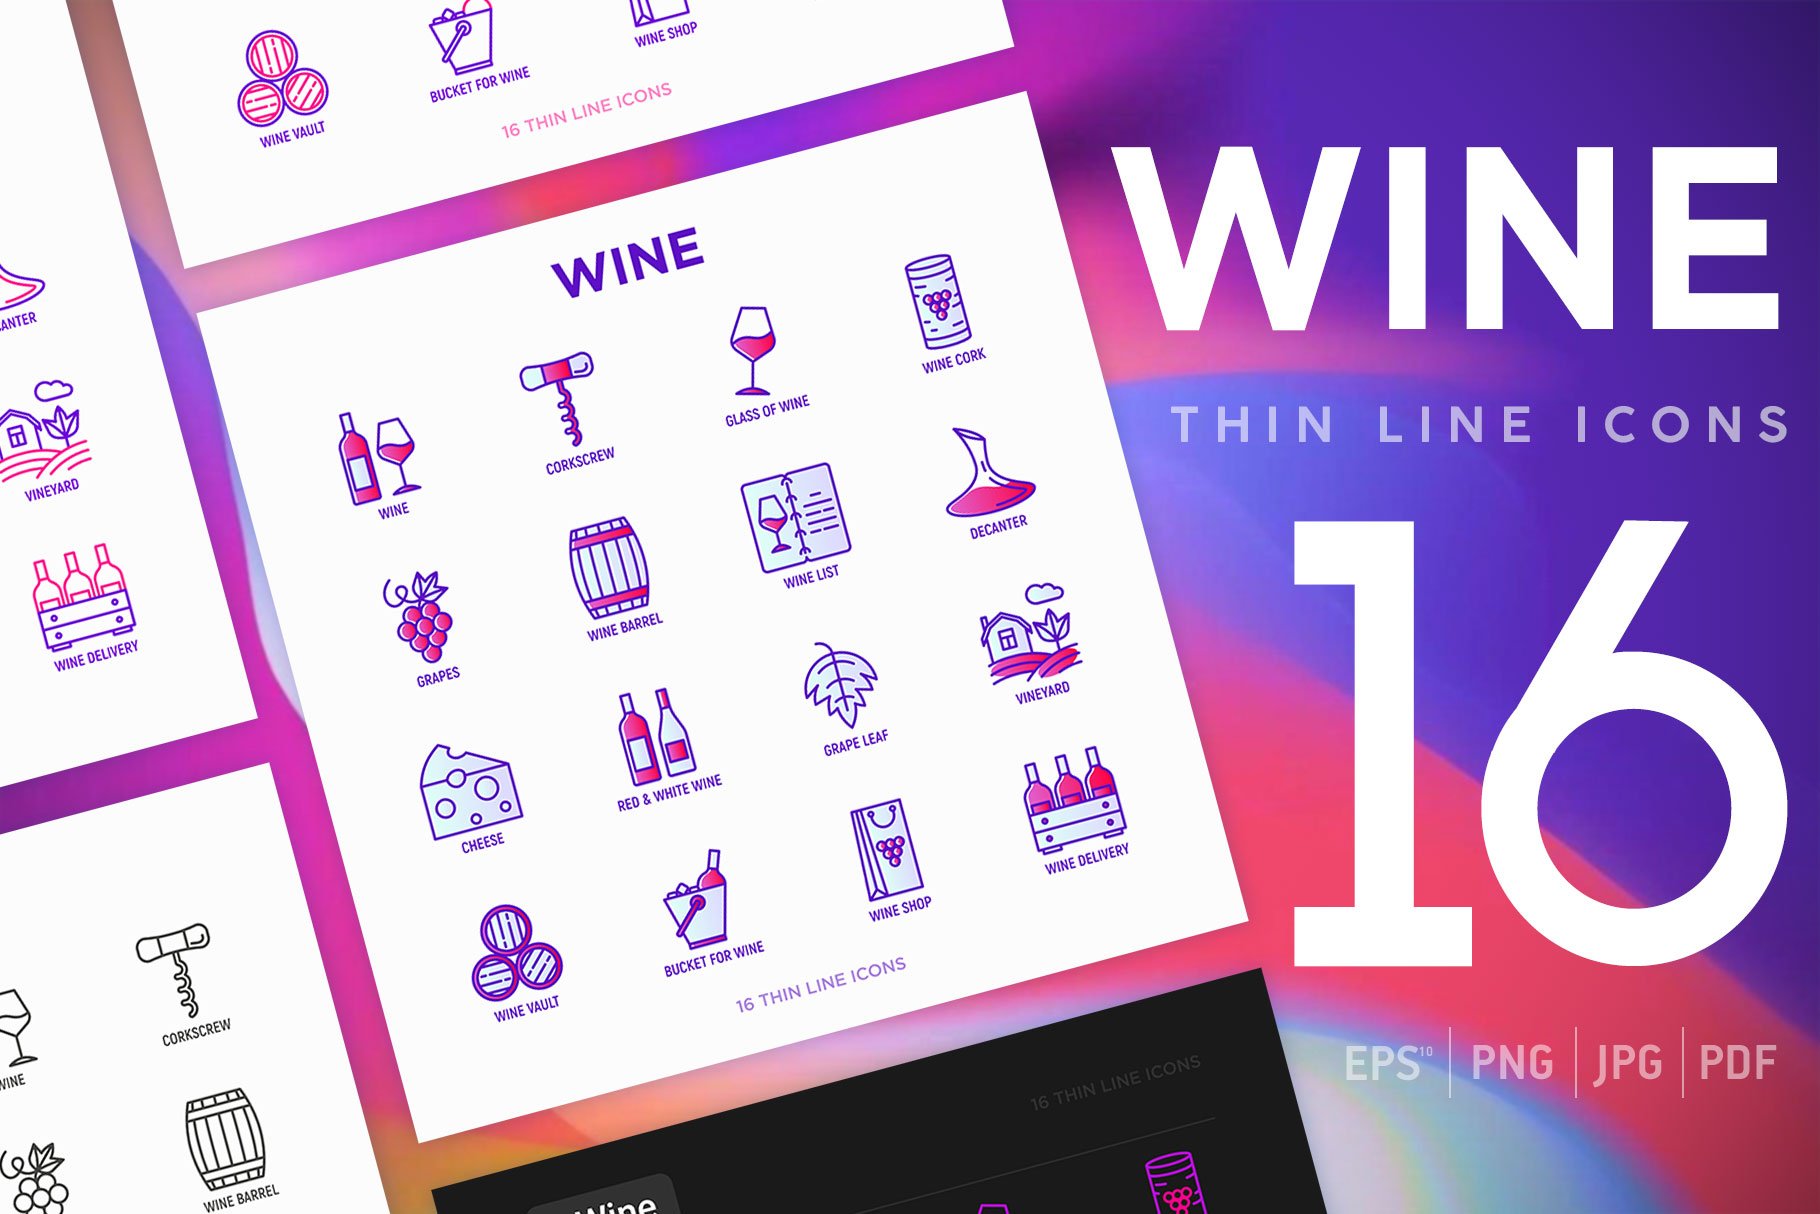 Wine | 16 Thin Line Icons Set cover image.